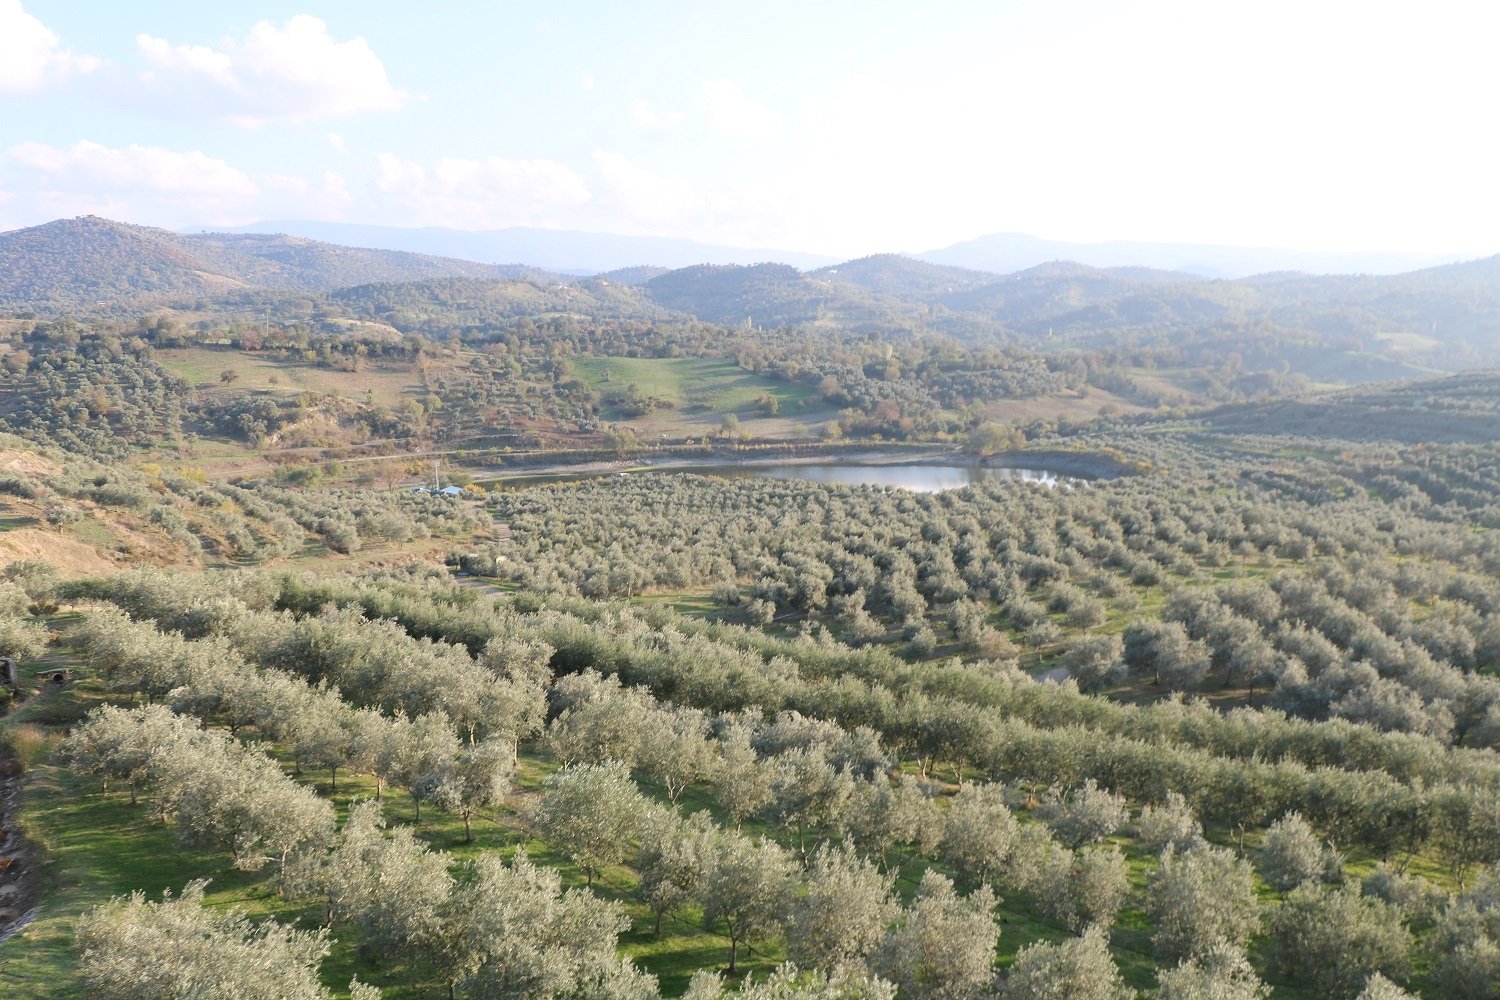 Olive trees were planted by Turkish companies Aydın Ligyit Madencilik and Zetay Tarım in the abandoned mine sites in Aydın province, Turkey. (Photo provided to the press)